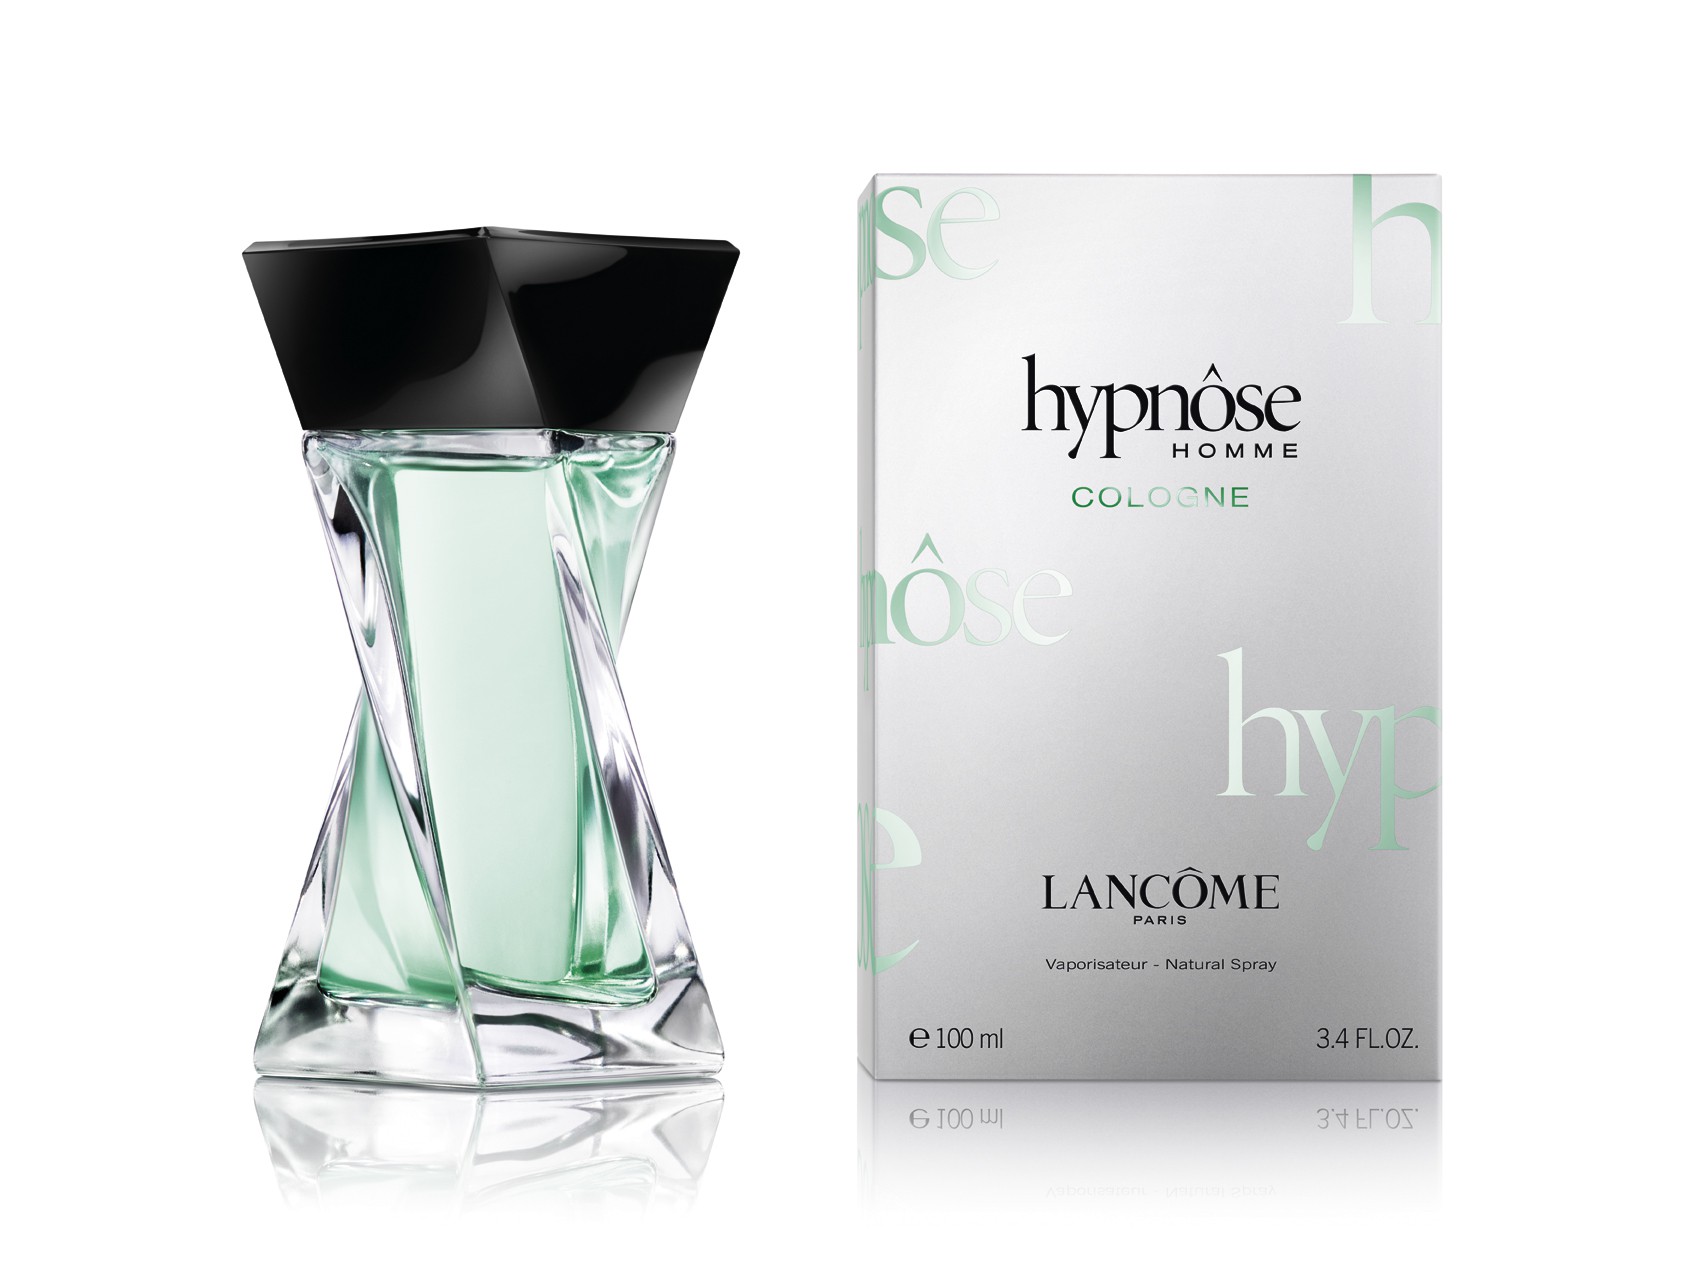 LANCOME HYPNOSE HOMM COLOGNE